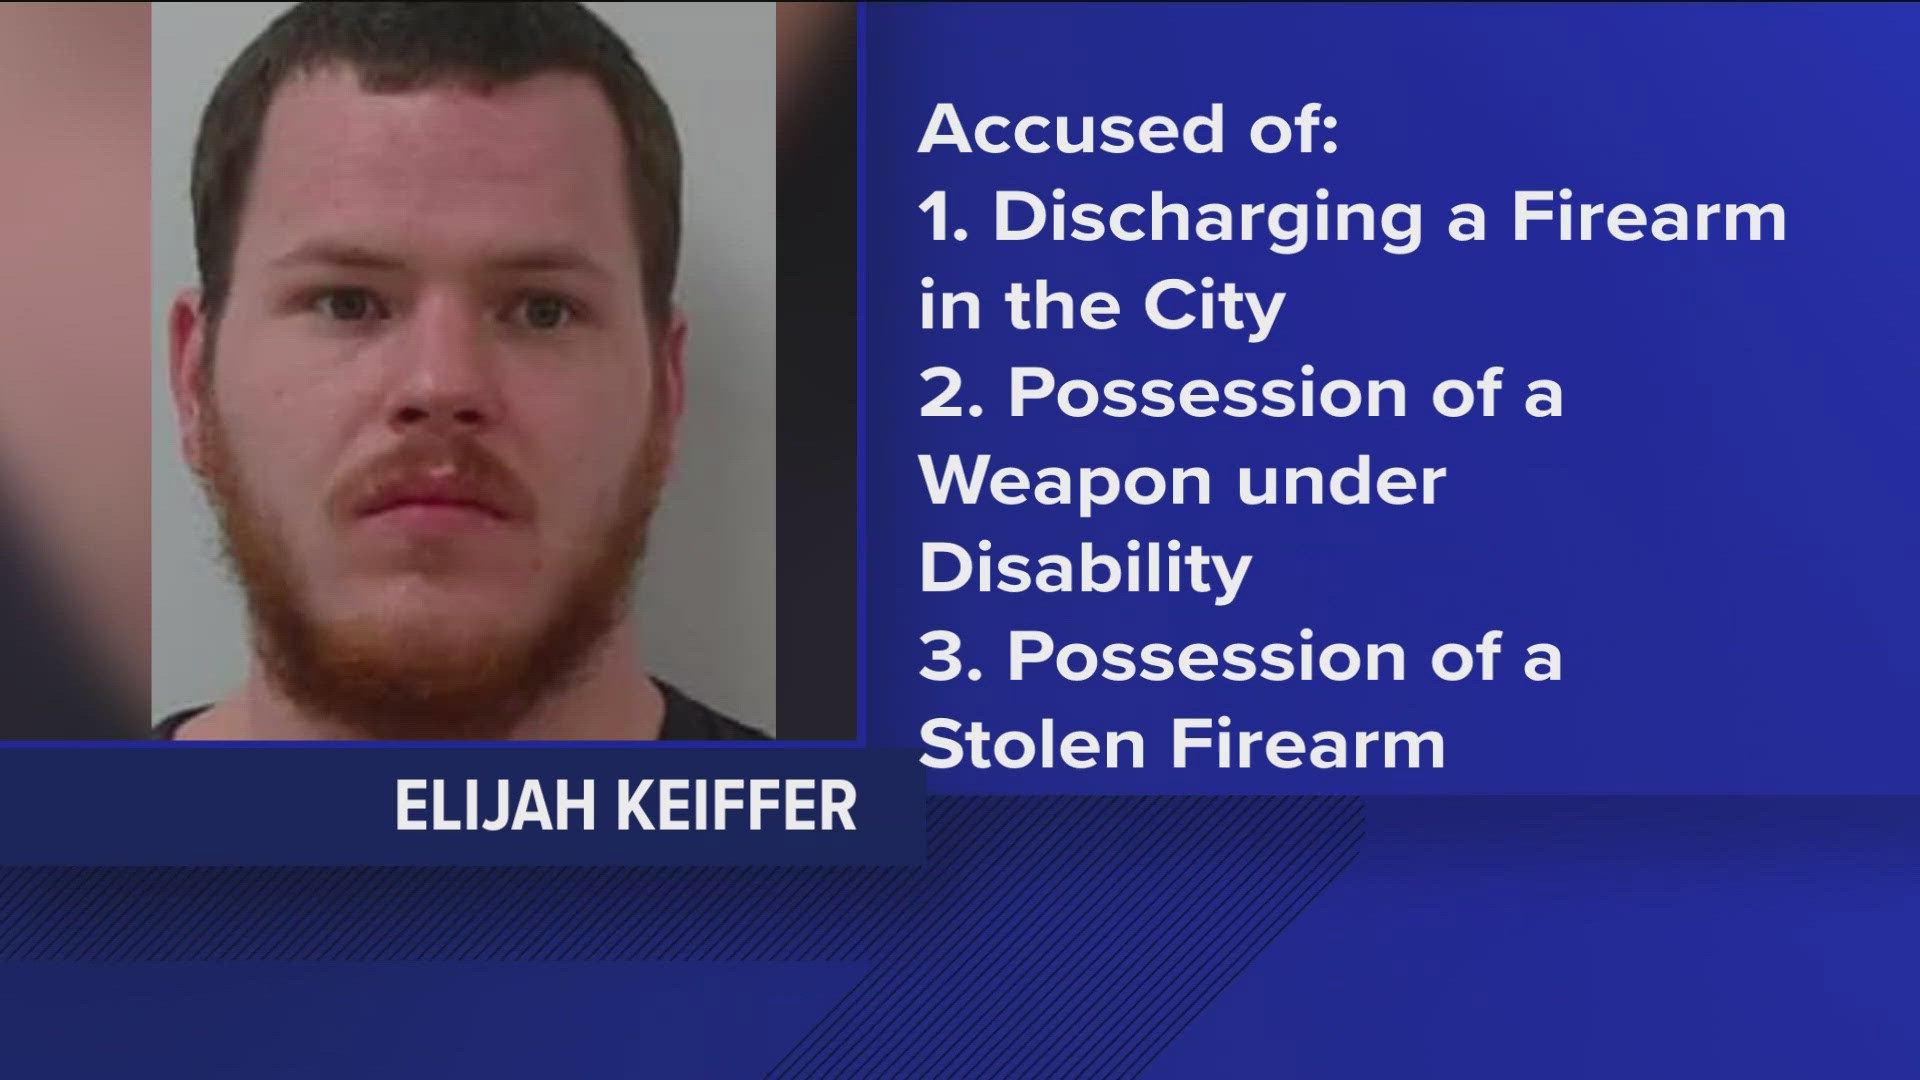 Police arrested Elijah Keiffer on multiple weapons charges Wednesday after he fled officers responding to a call of a suspicious person attempting to open vehicles.